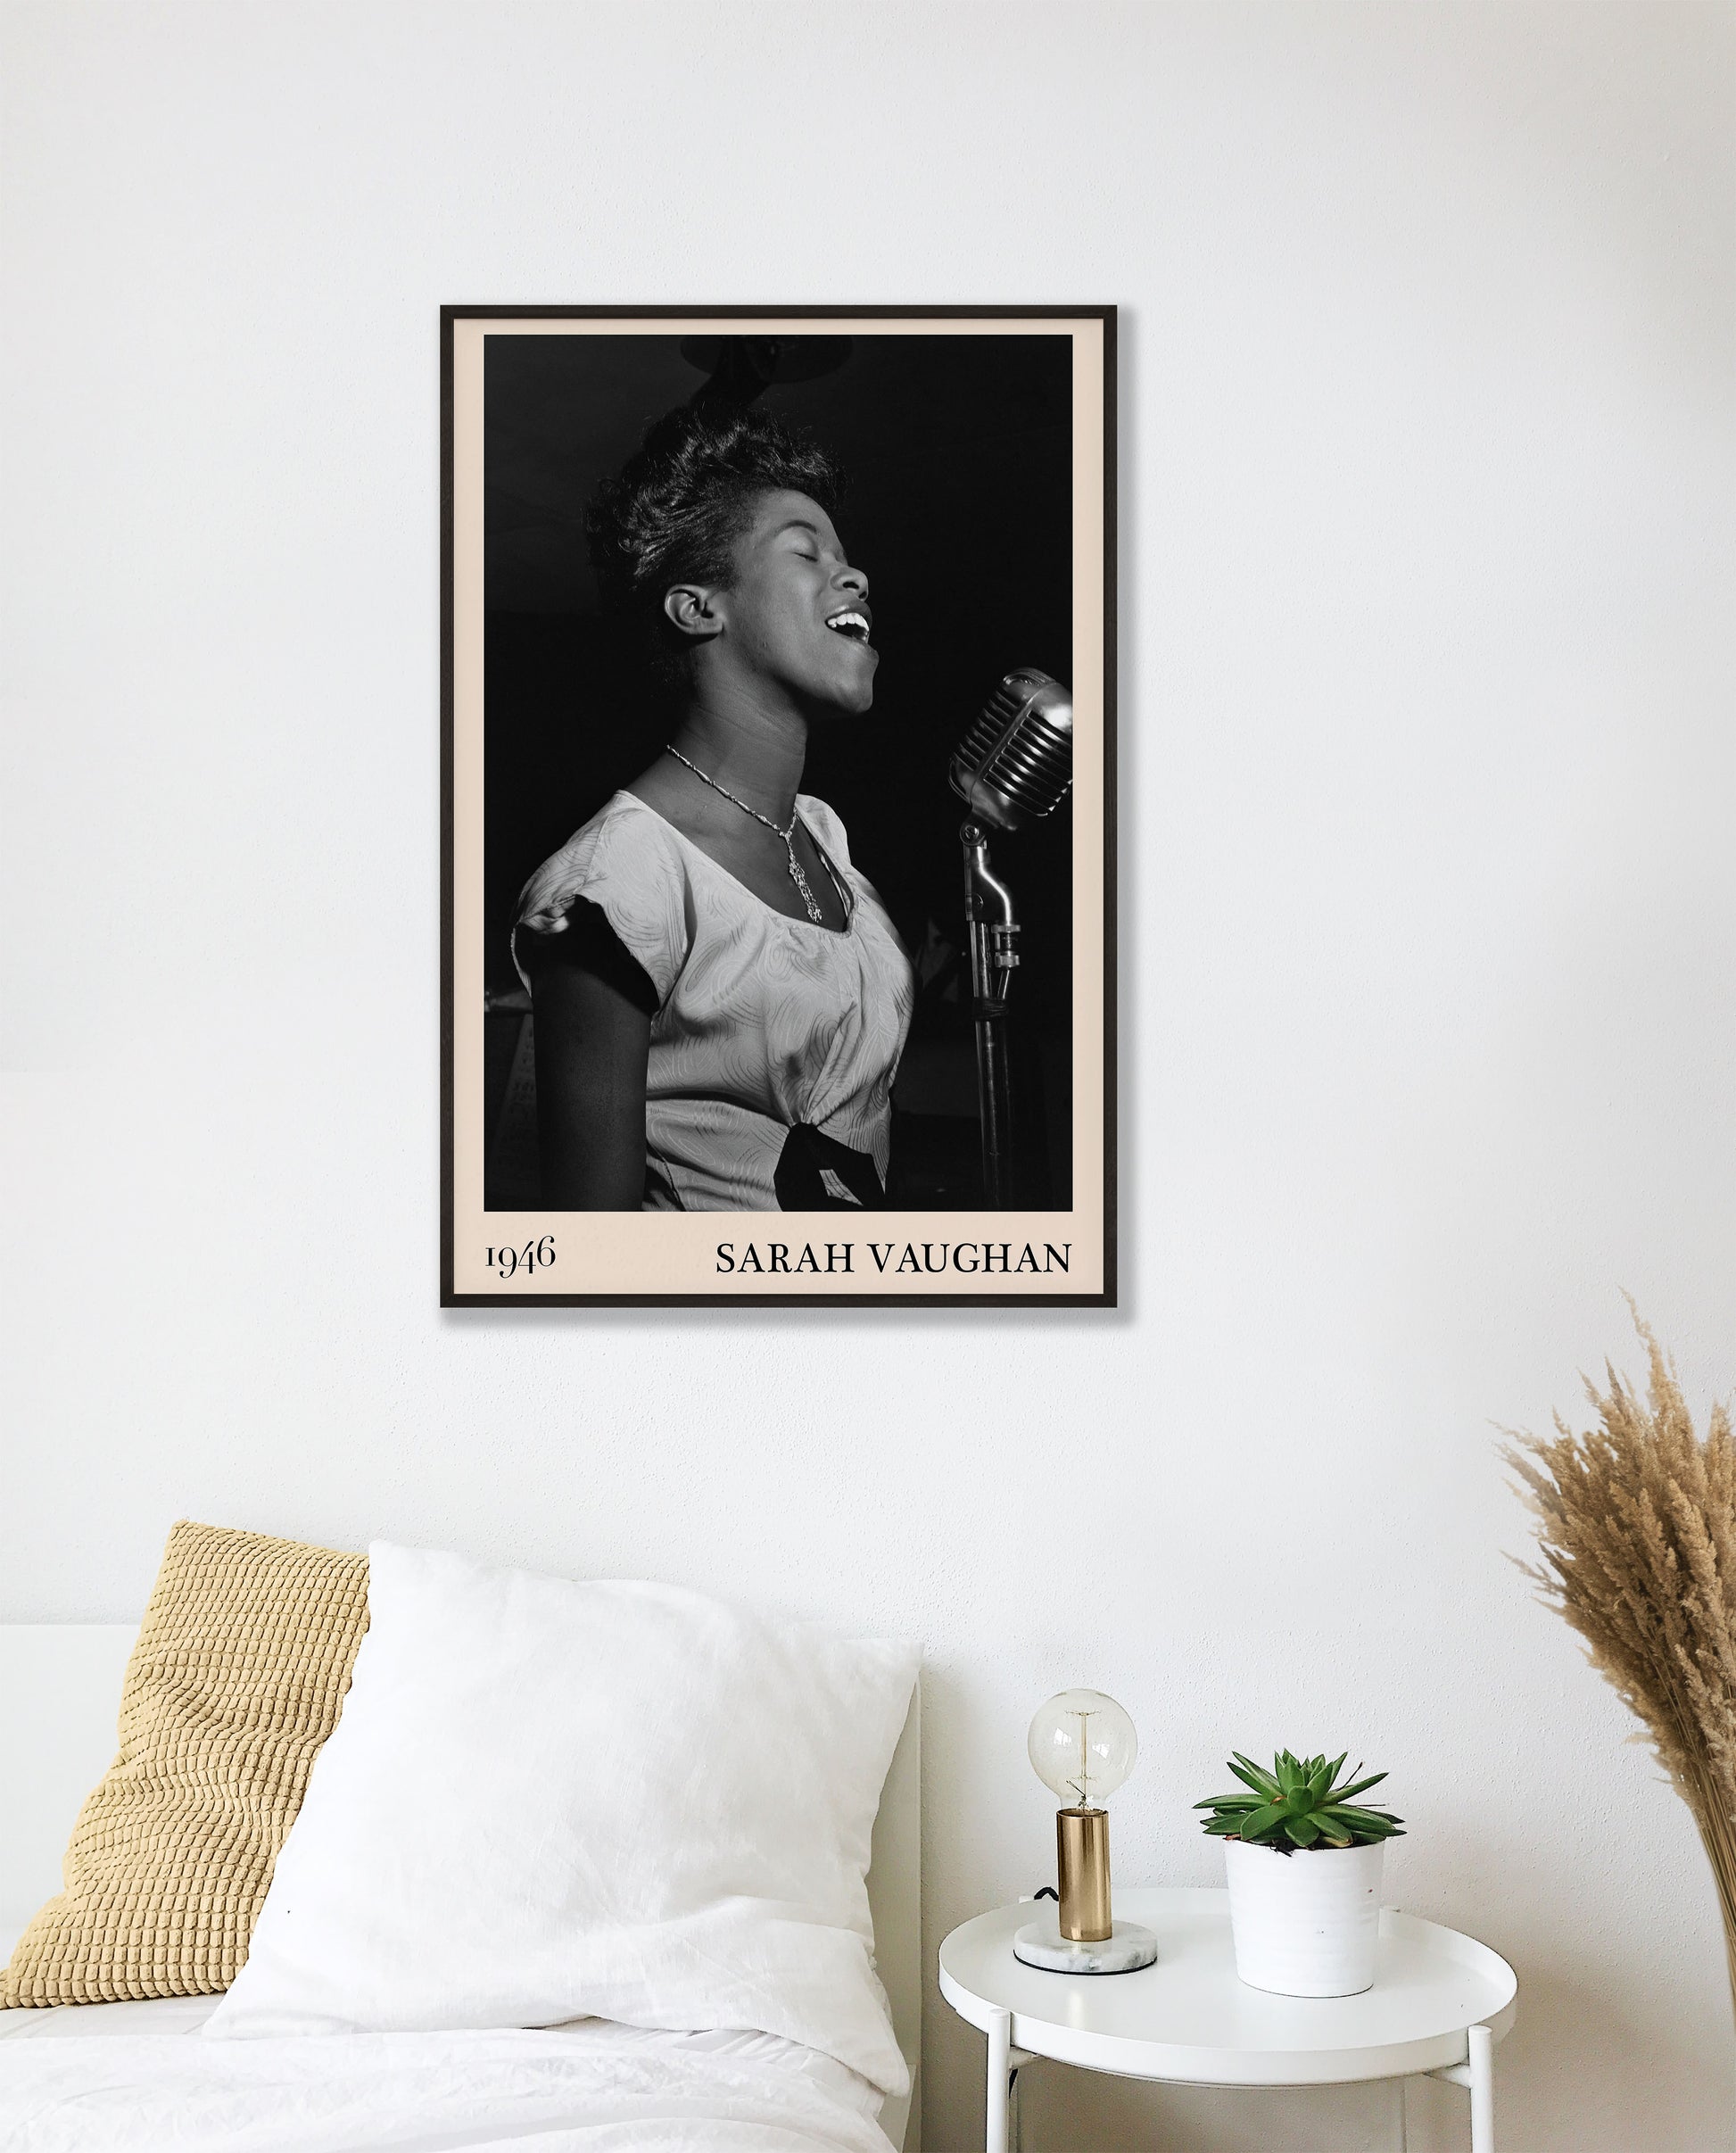 1946 photograph of Sarah Vaughan crafted into a cool black framed music poster. The poster is hanging on a white bedroom wall.